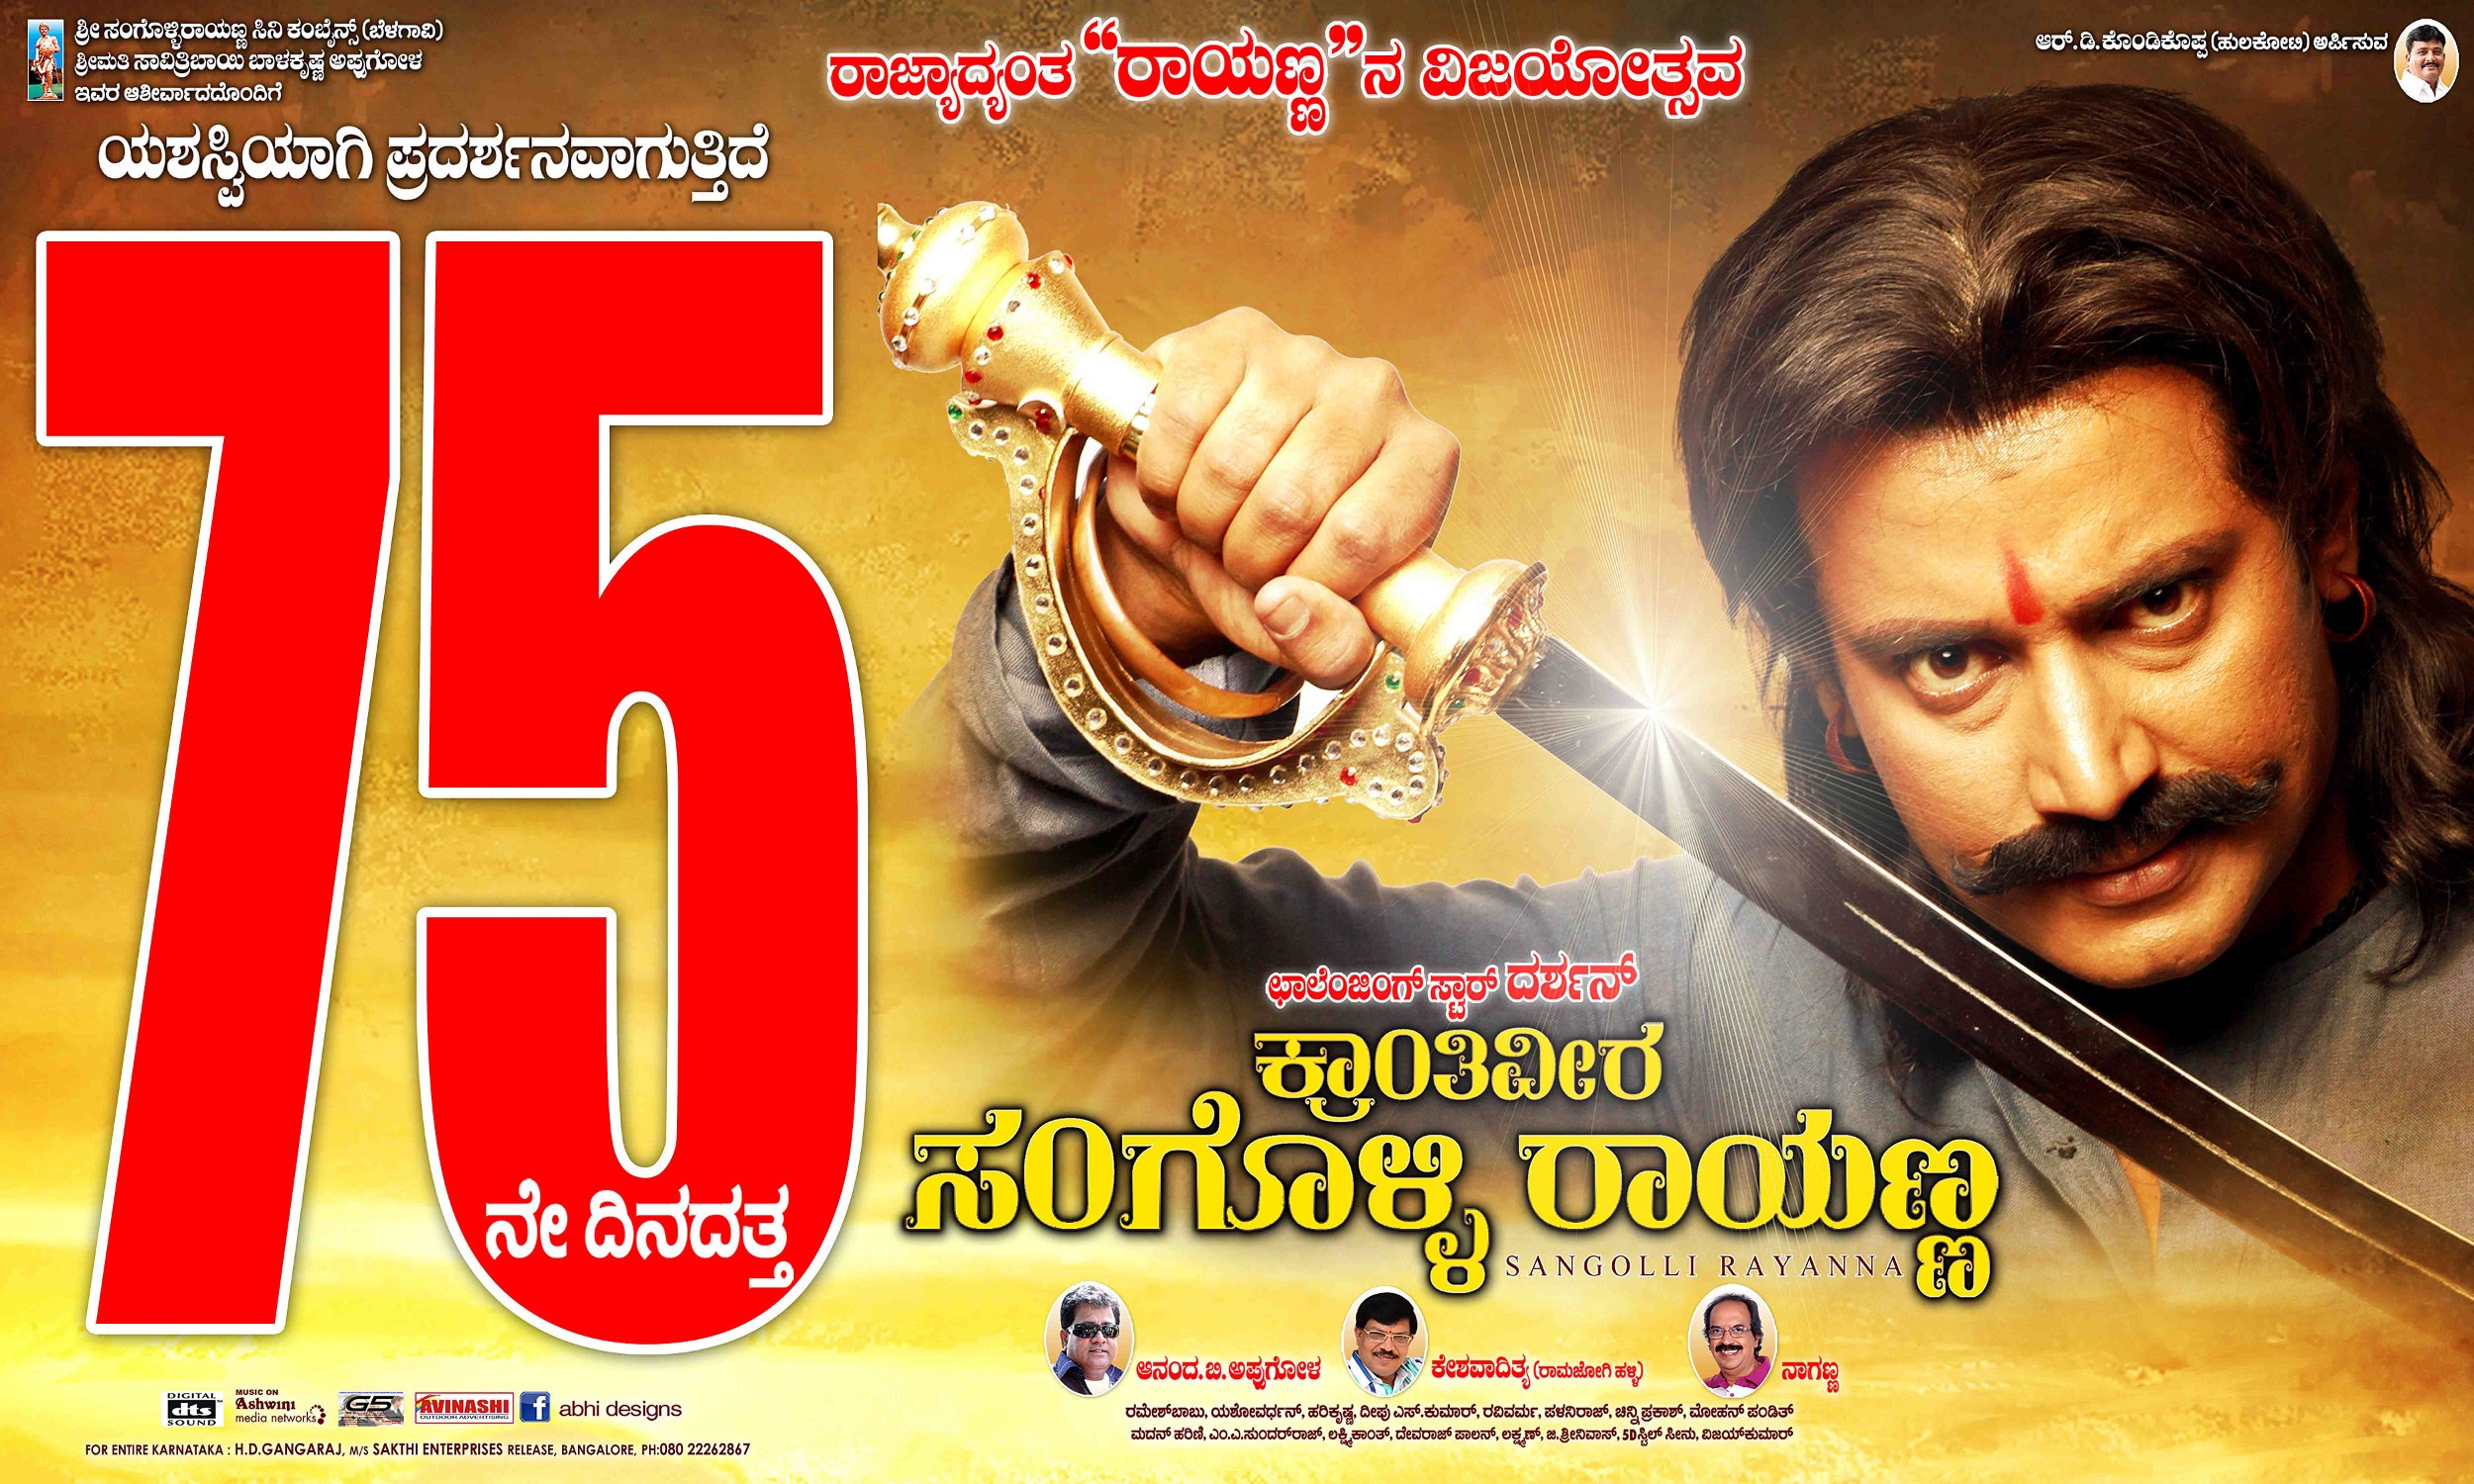 Mega Sized Movie Poster Image for Sangolli Rayanna (#65 of 79)